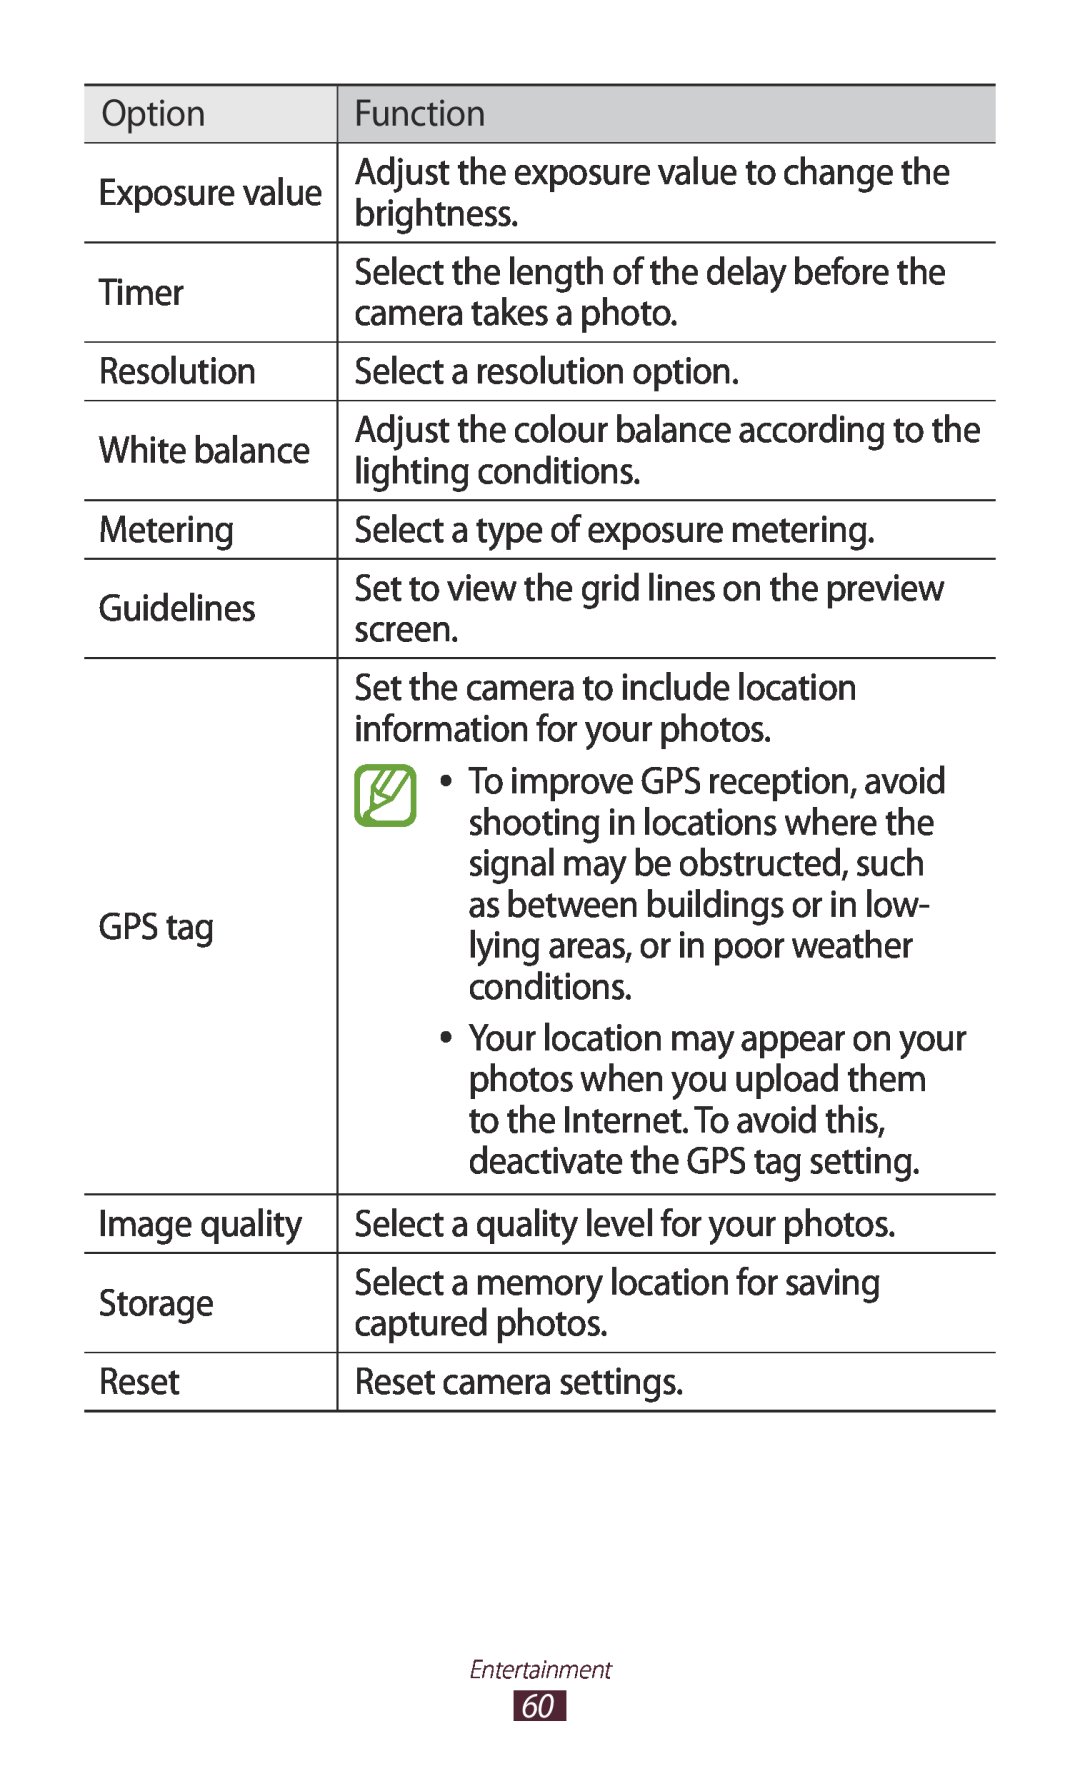 Samsung GTP5110ZWMTTT Exposure value, Adjust the exposure value to change the, Select the length of the delay before the 